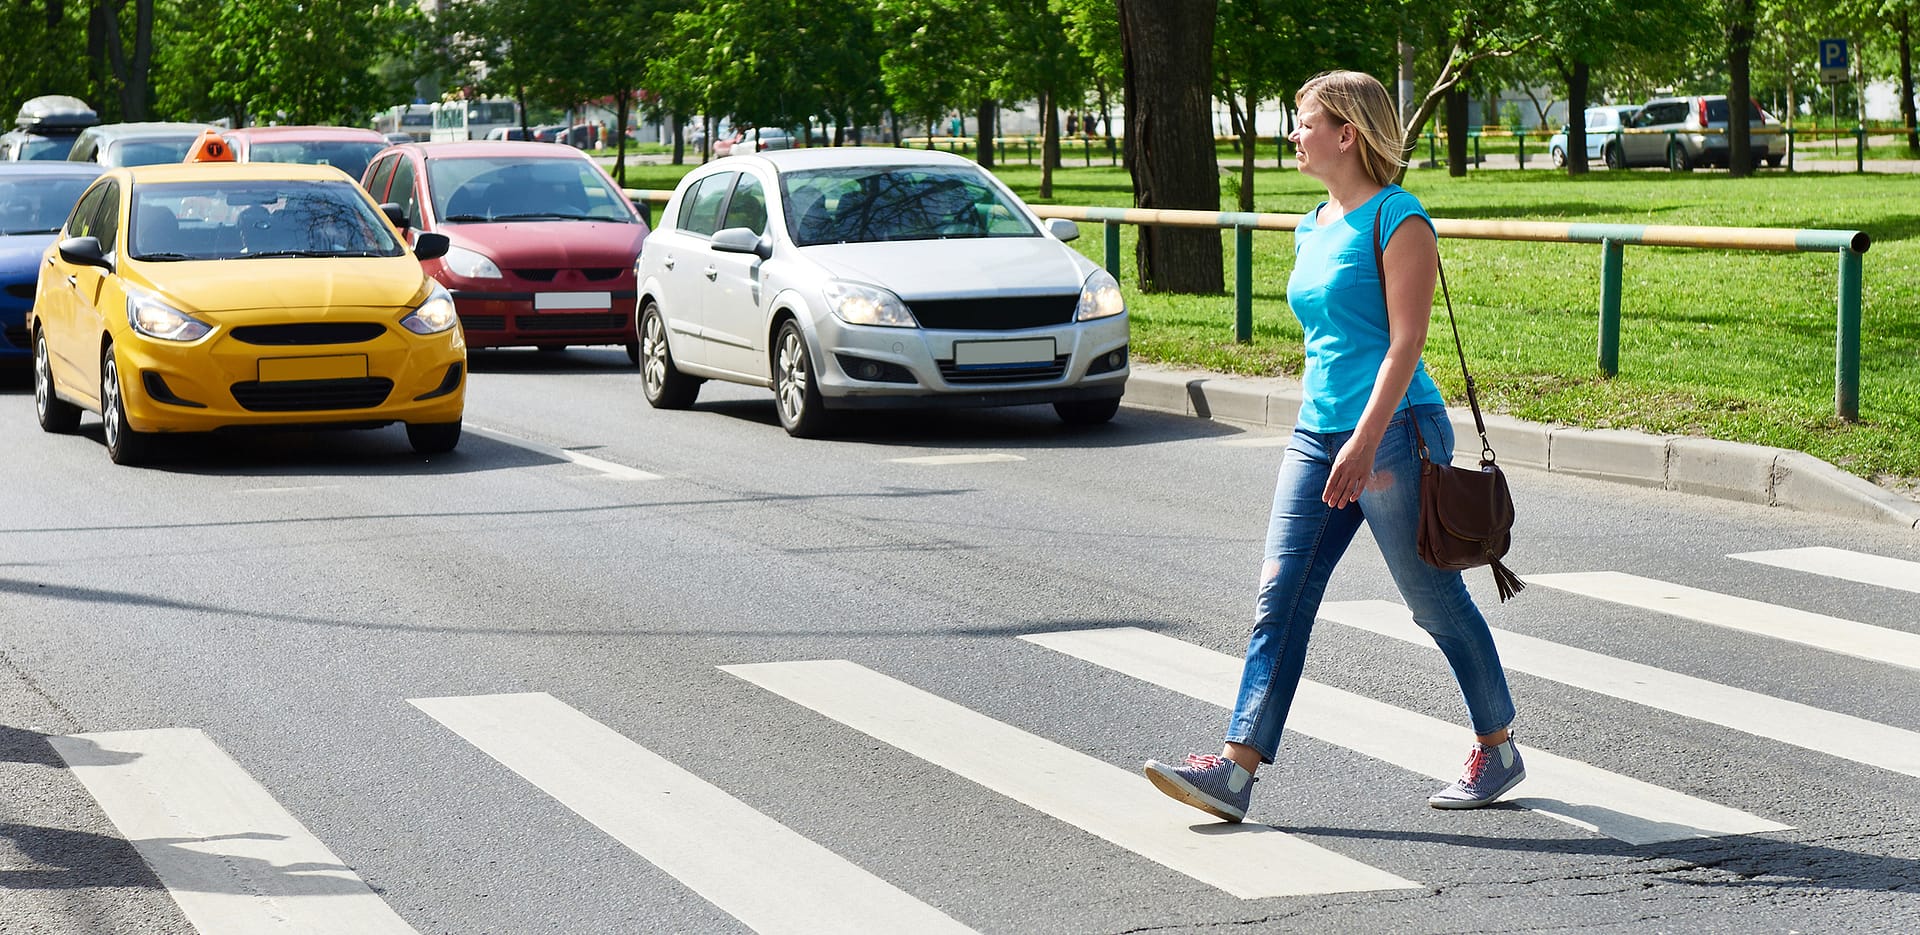 What are Florida's Pedestrian Laws?